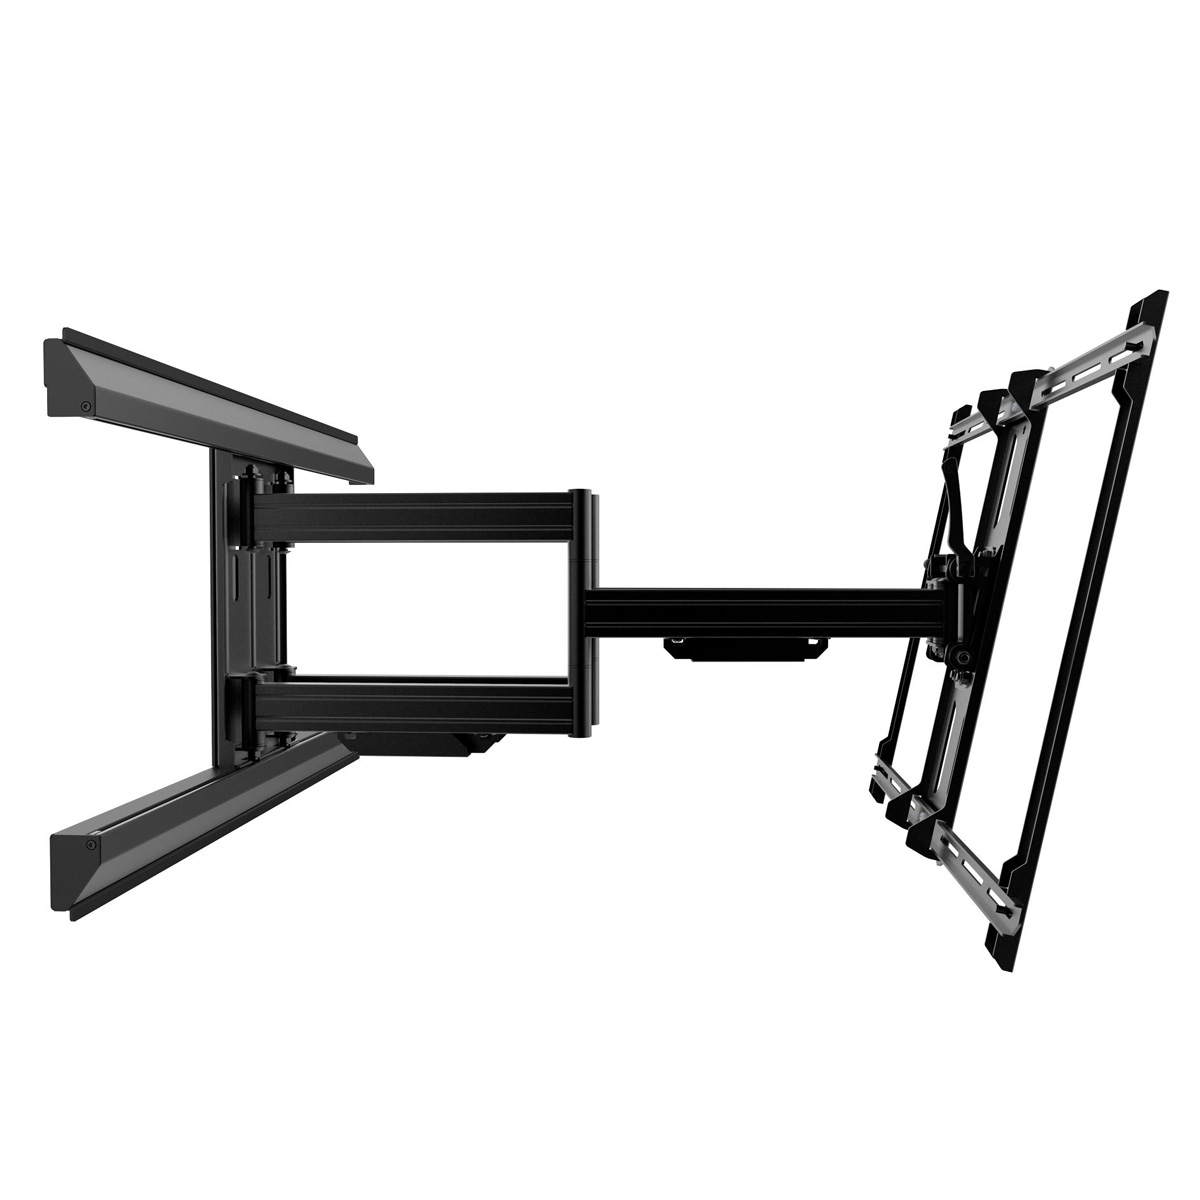 Kanto PMX700 Articulating Full Motion Mount for 42" - 100" TV - image 4 of 8